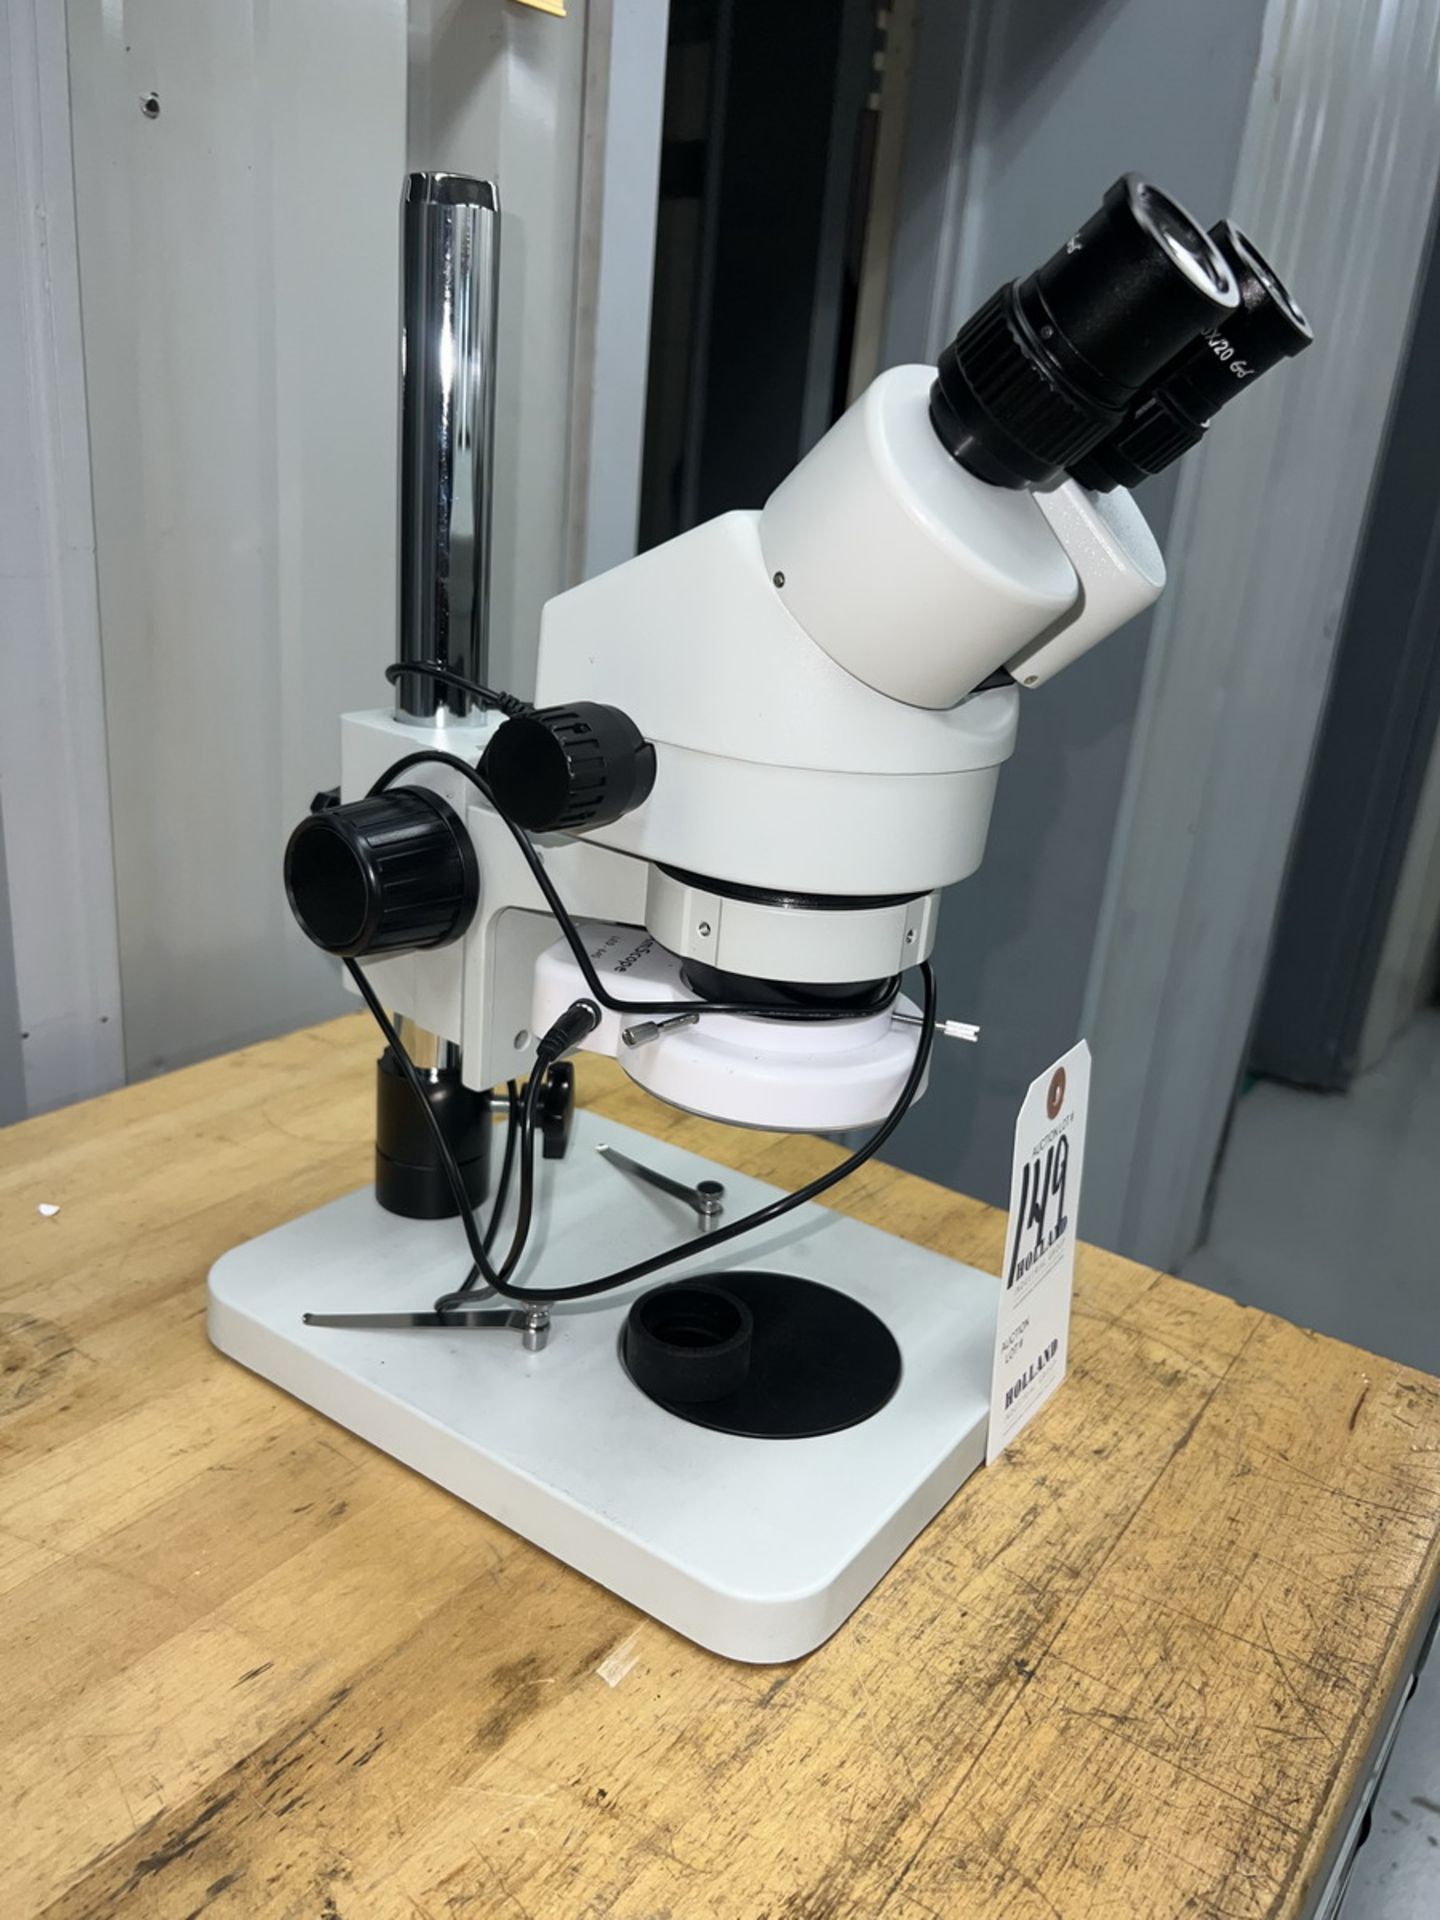 0.7x-4.5x Stereo Zoom Microscope - Image 2 of 6